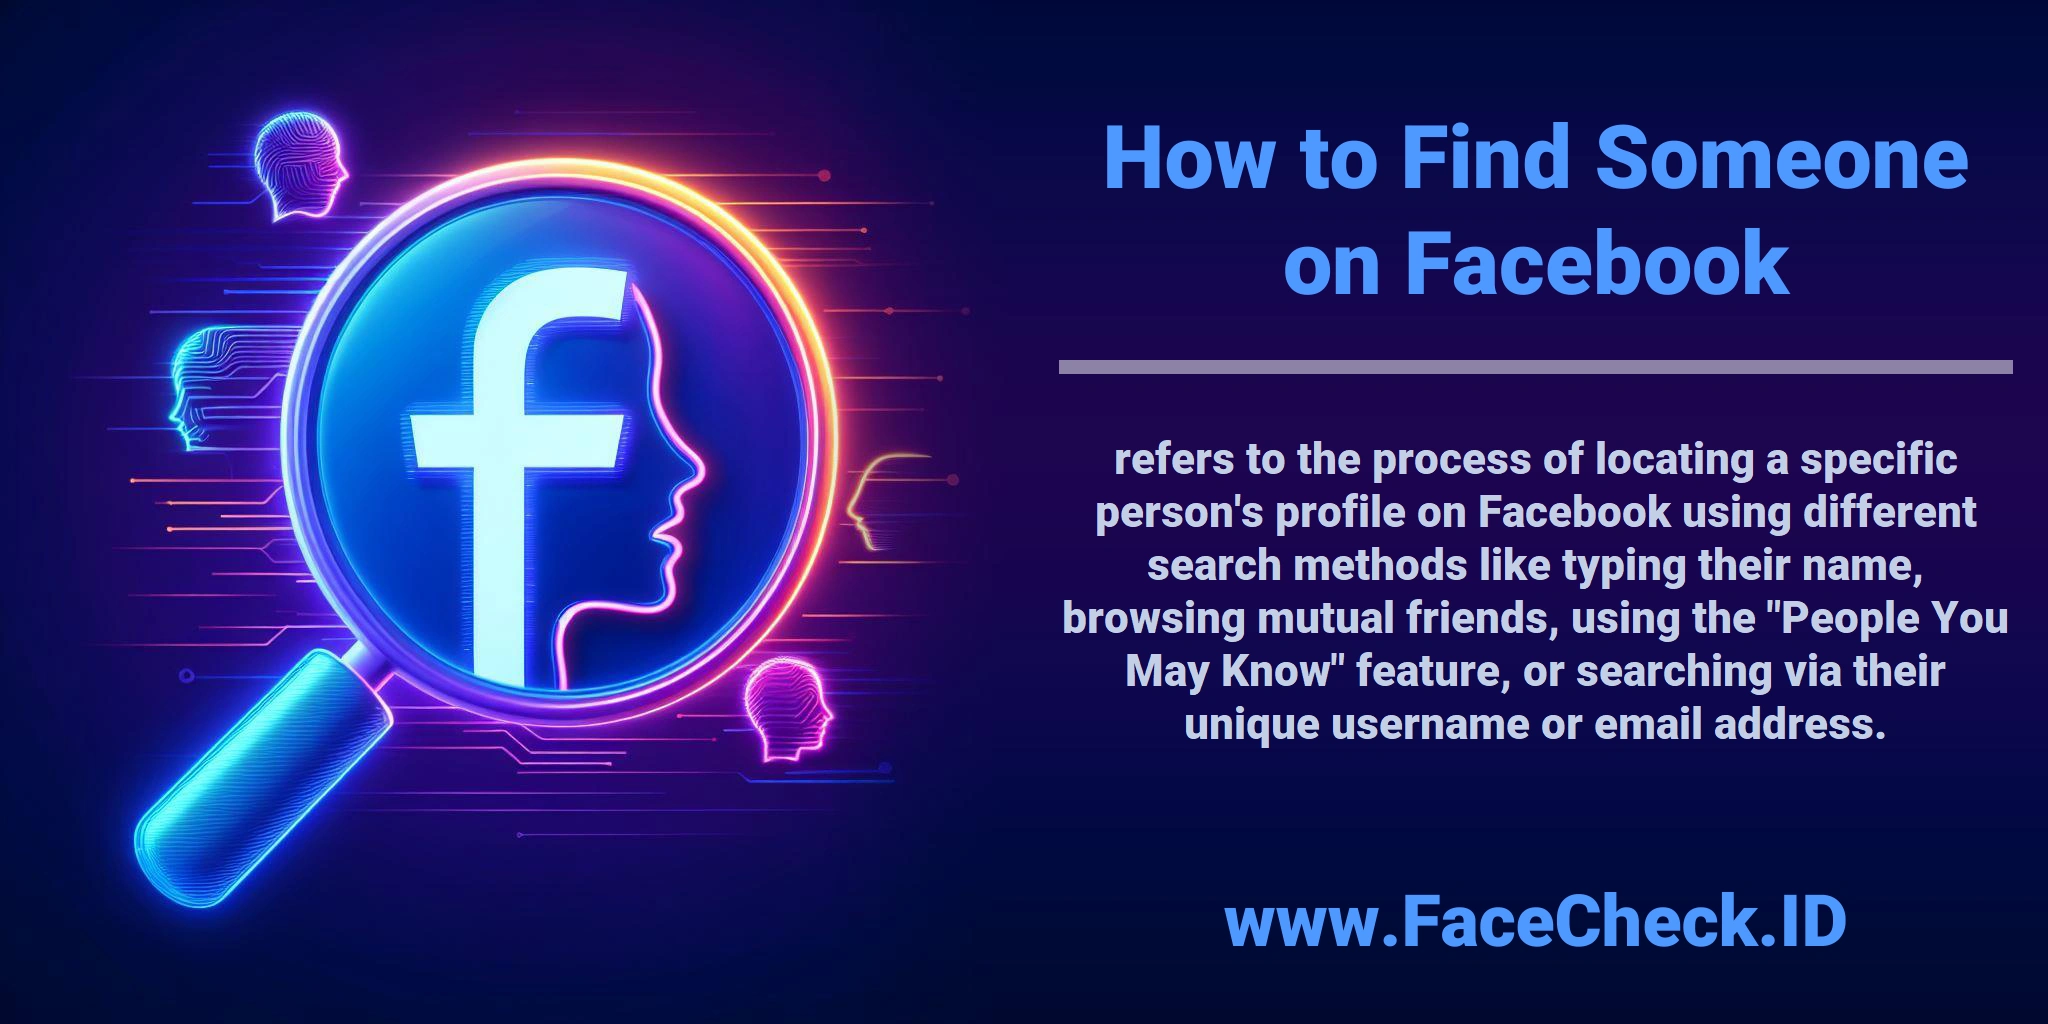 <b>How to Find Someone on Facebook</b> refers to the process of locating a specific person's profile on Facebook using different search methods like typing their name, browsing mutual friends, using the 